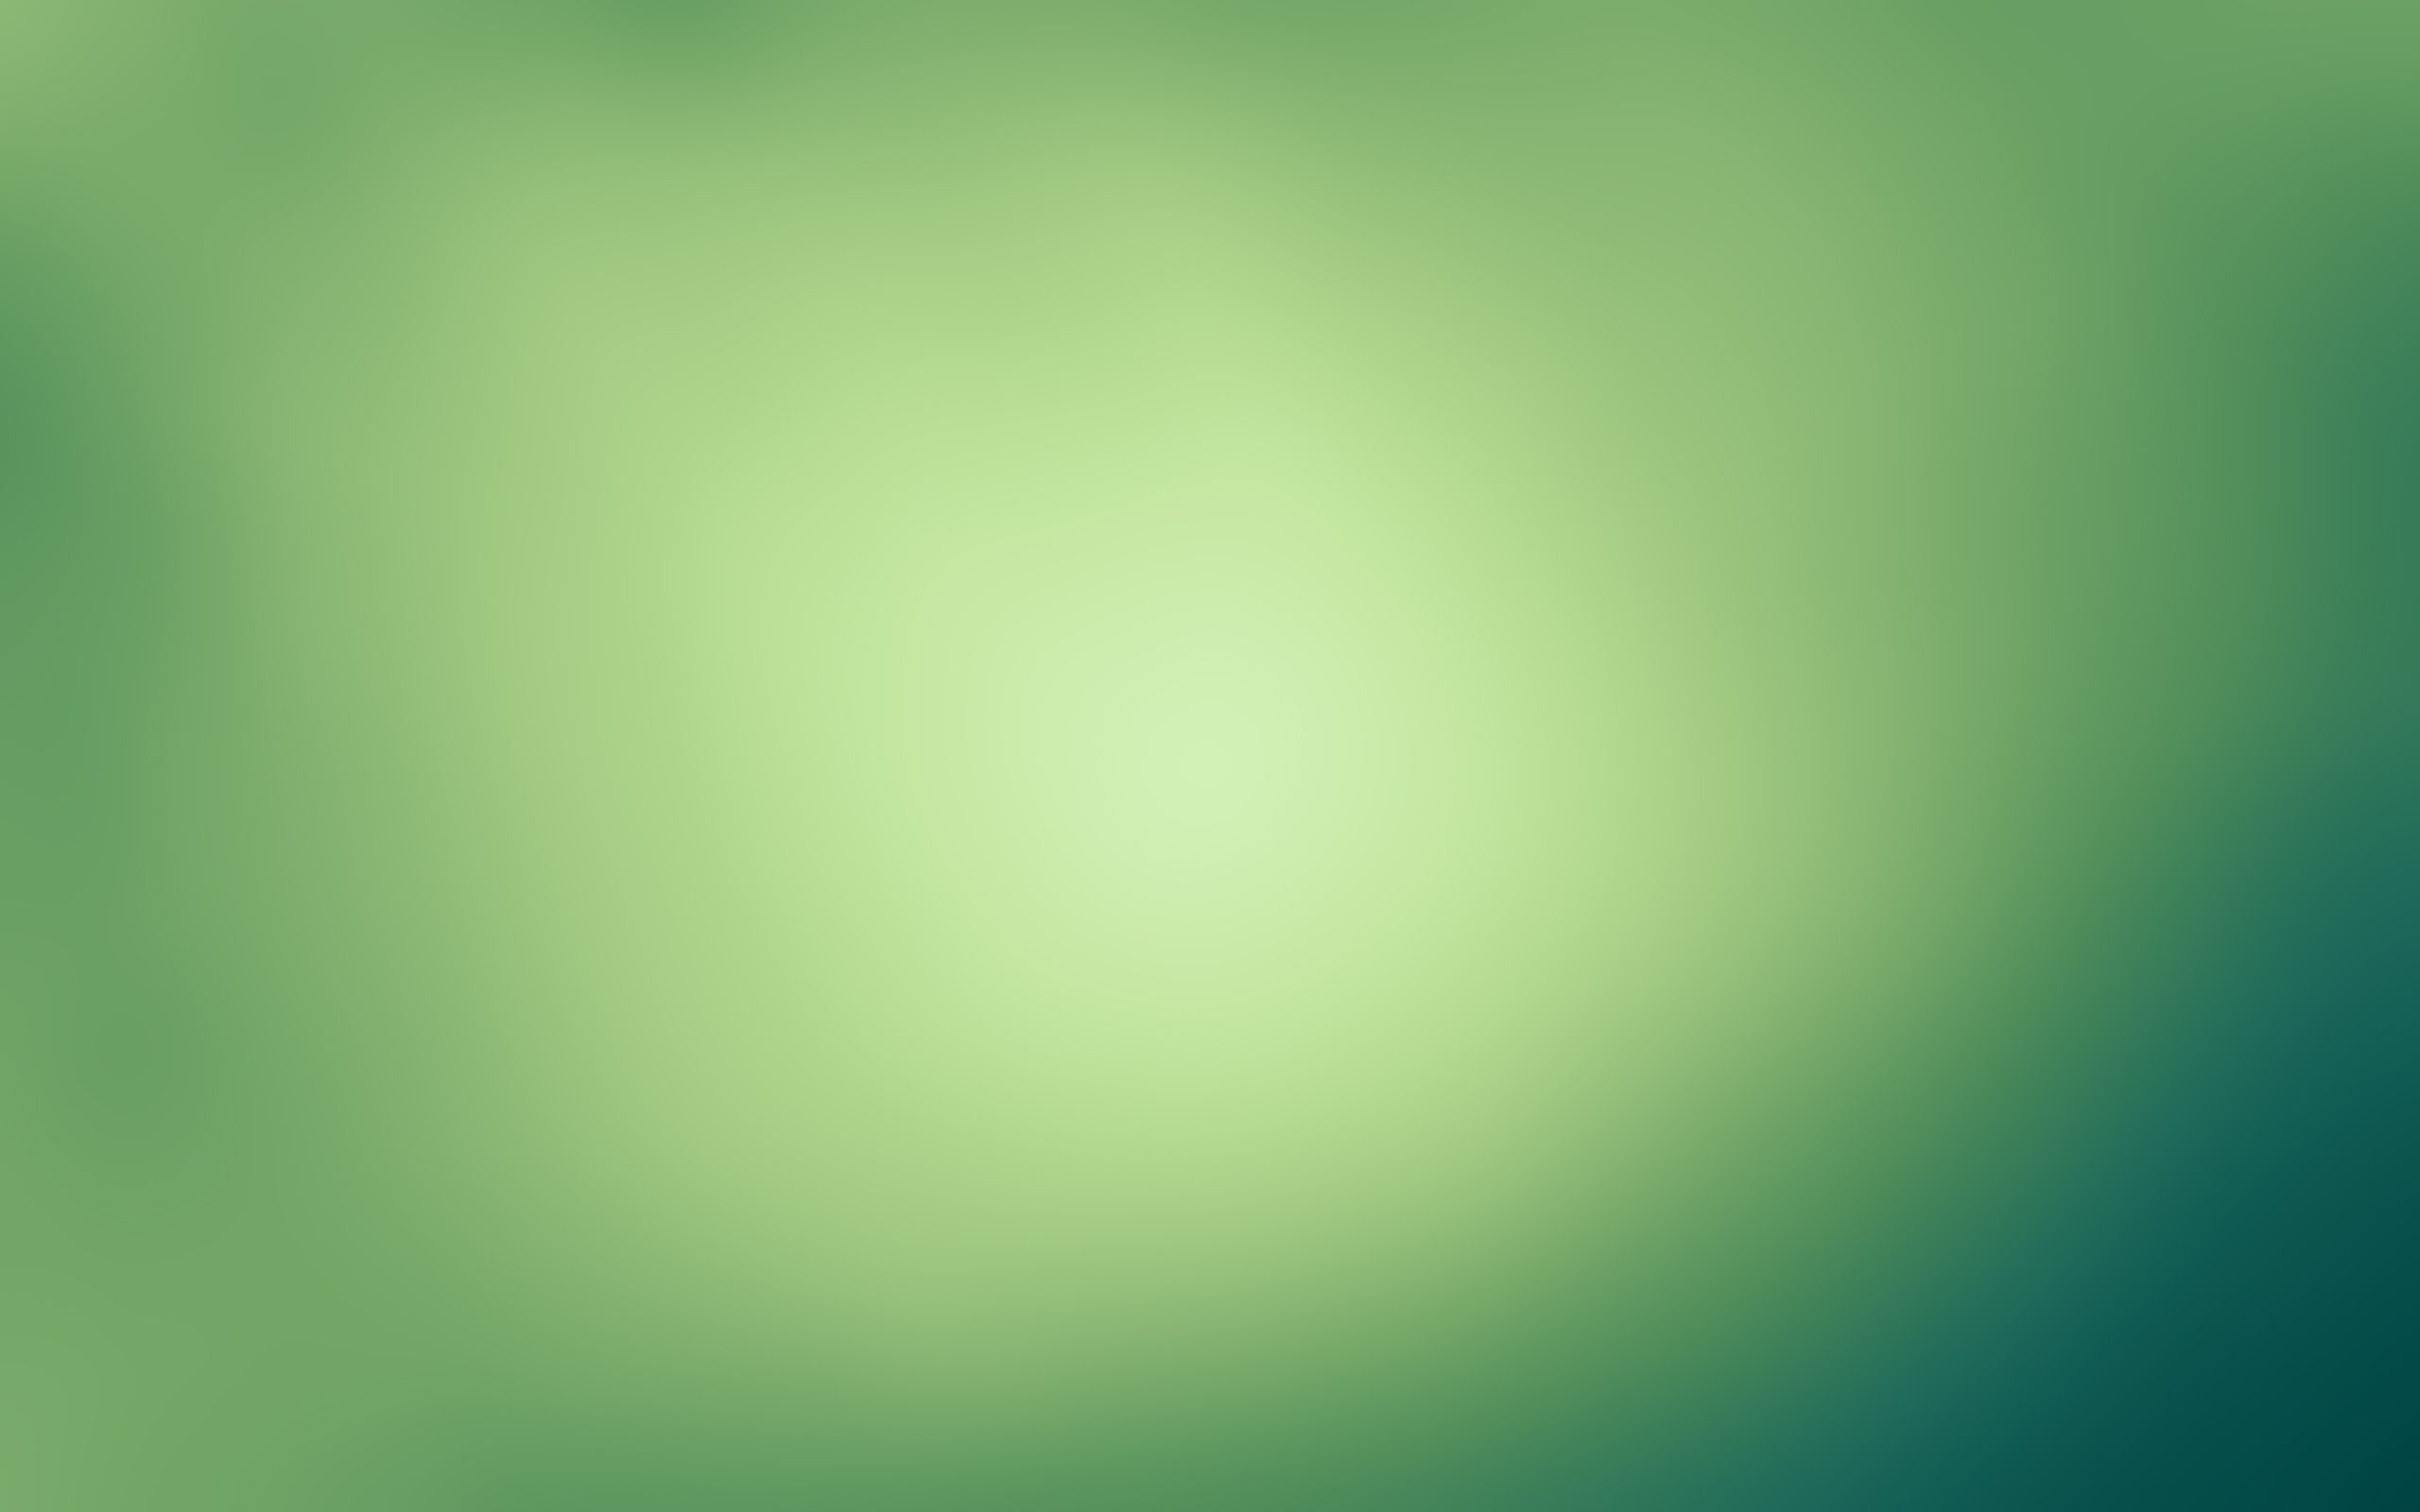 Gallery for - green color background wallpaper